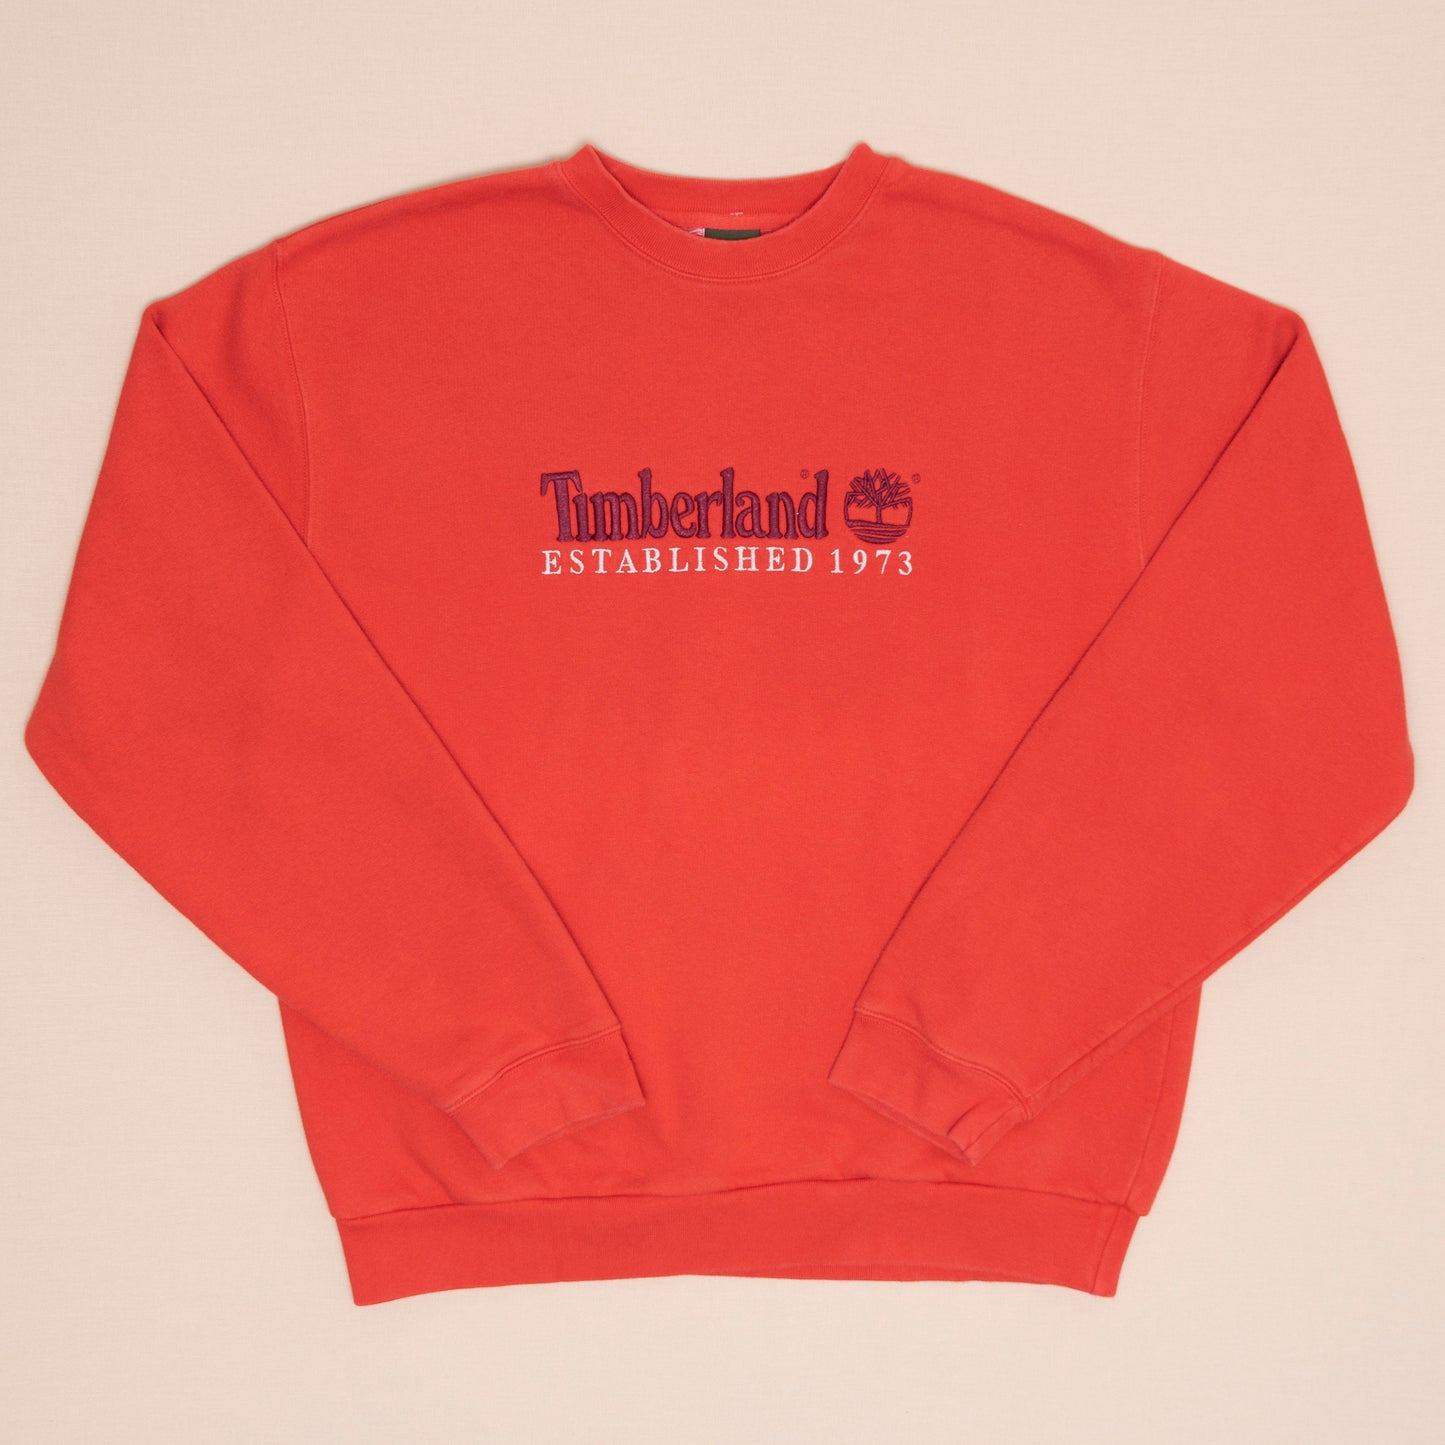 Timberland Spellout Sweater, L